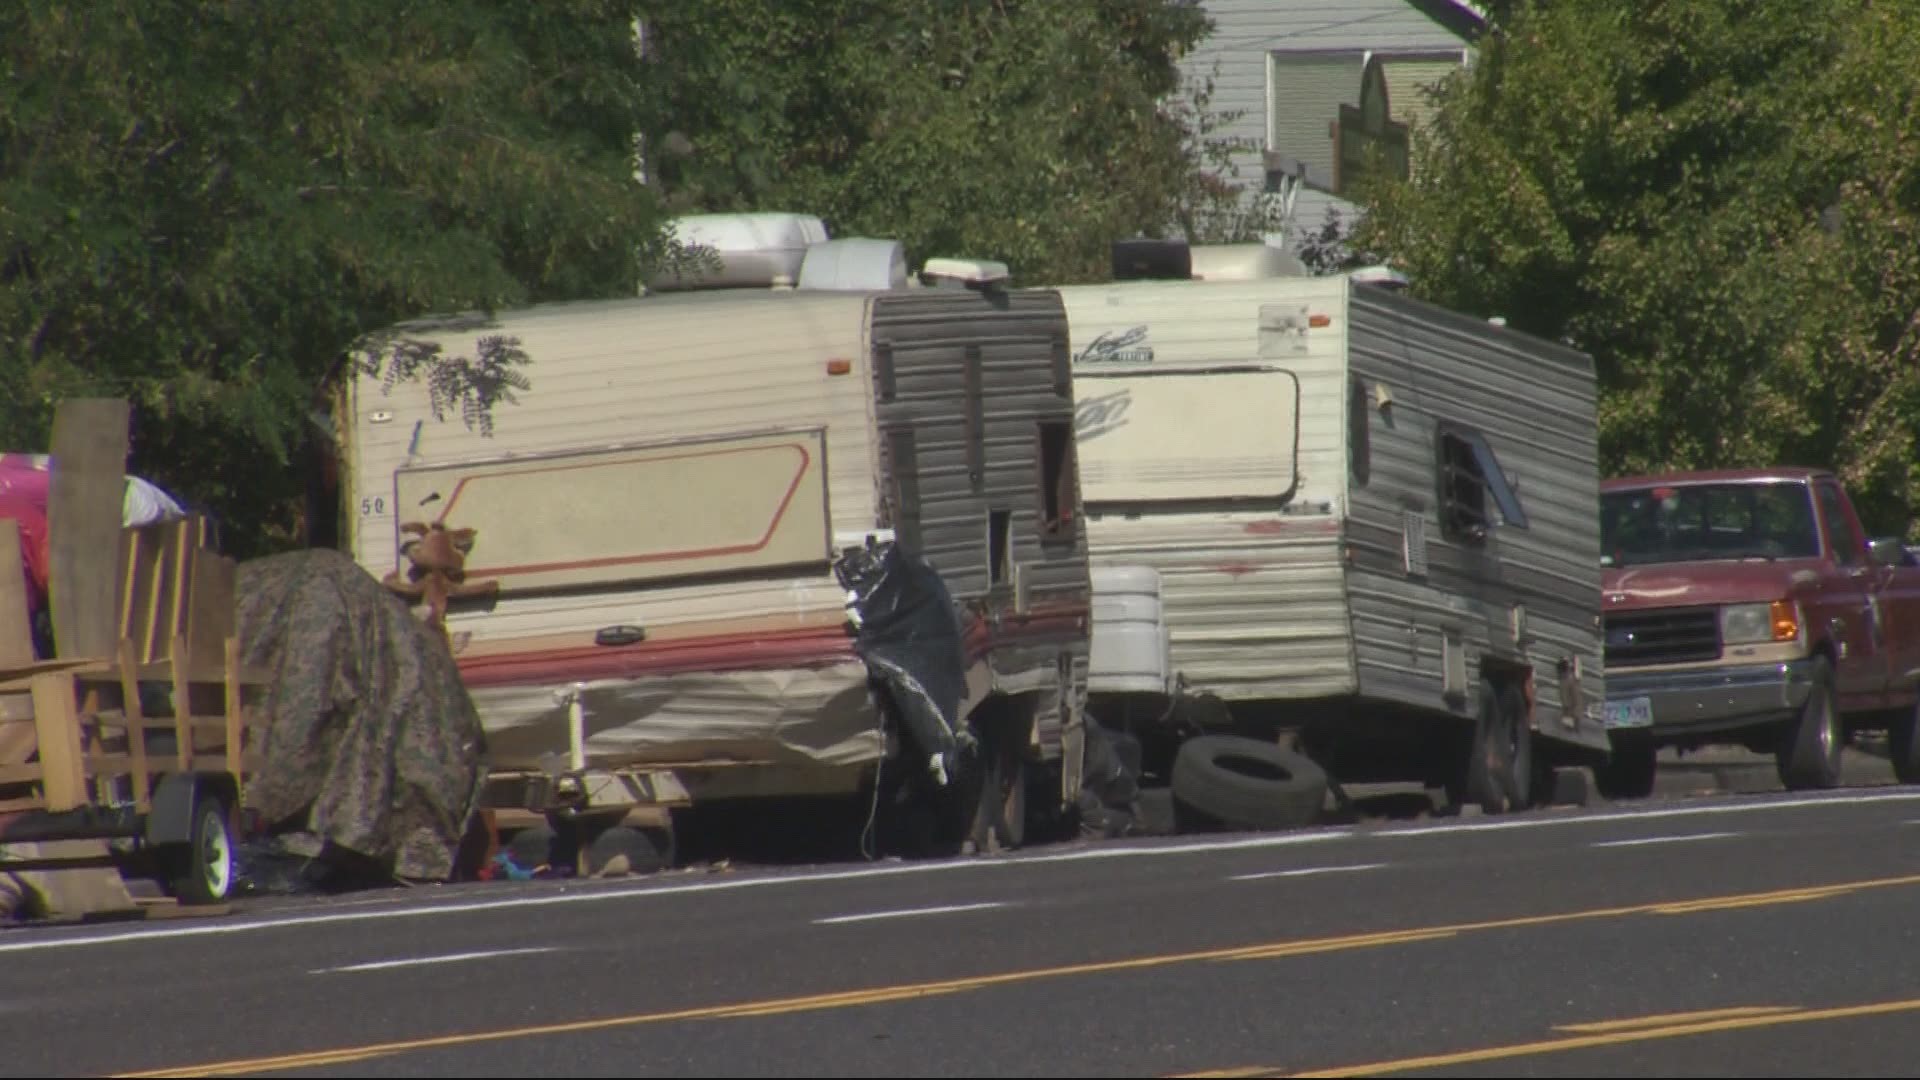 Crews have already pumped waste out of more than 190 RVs with a goal of preventing pollution.